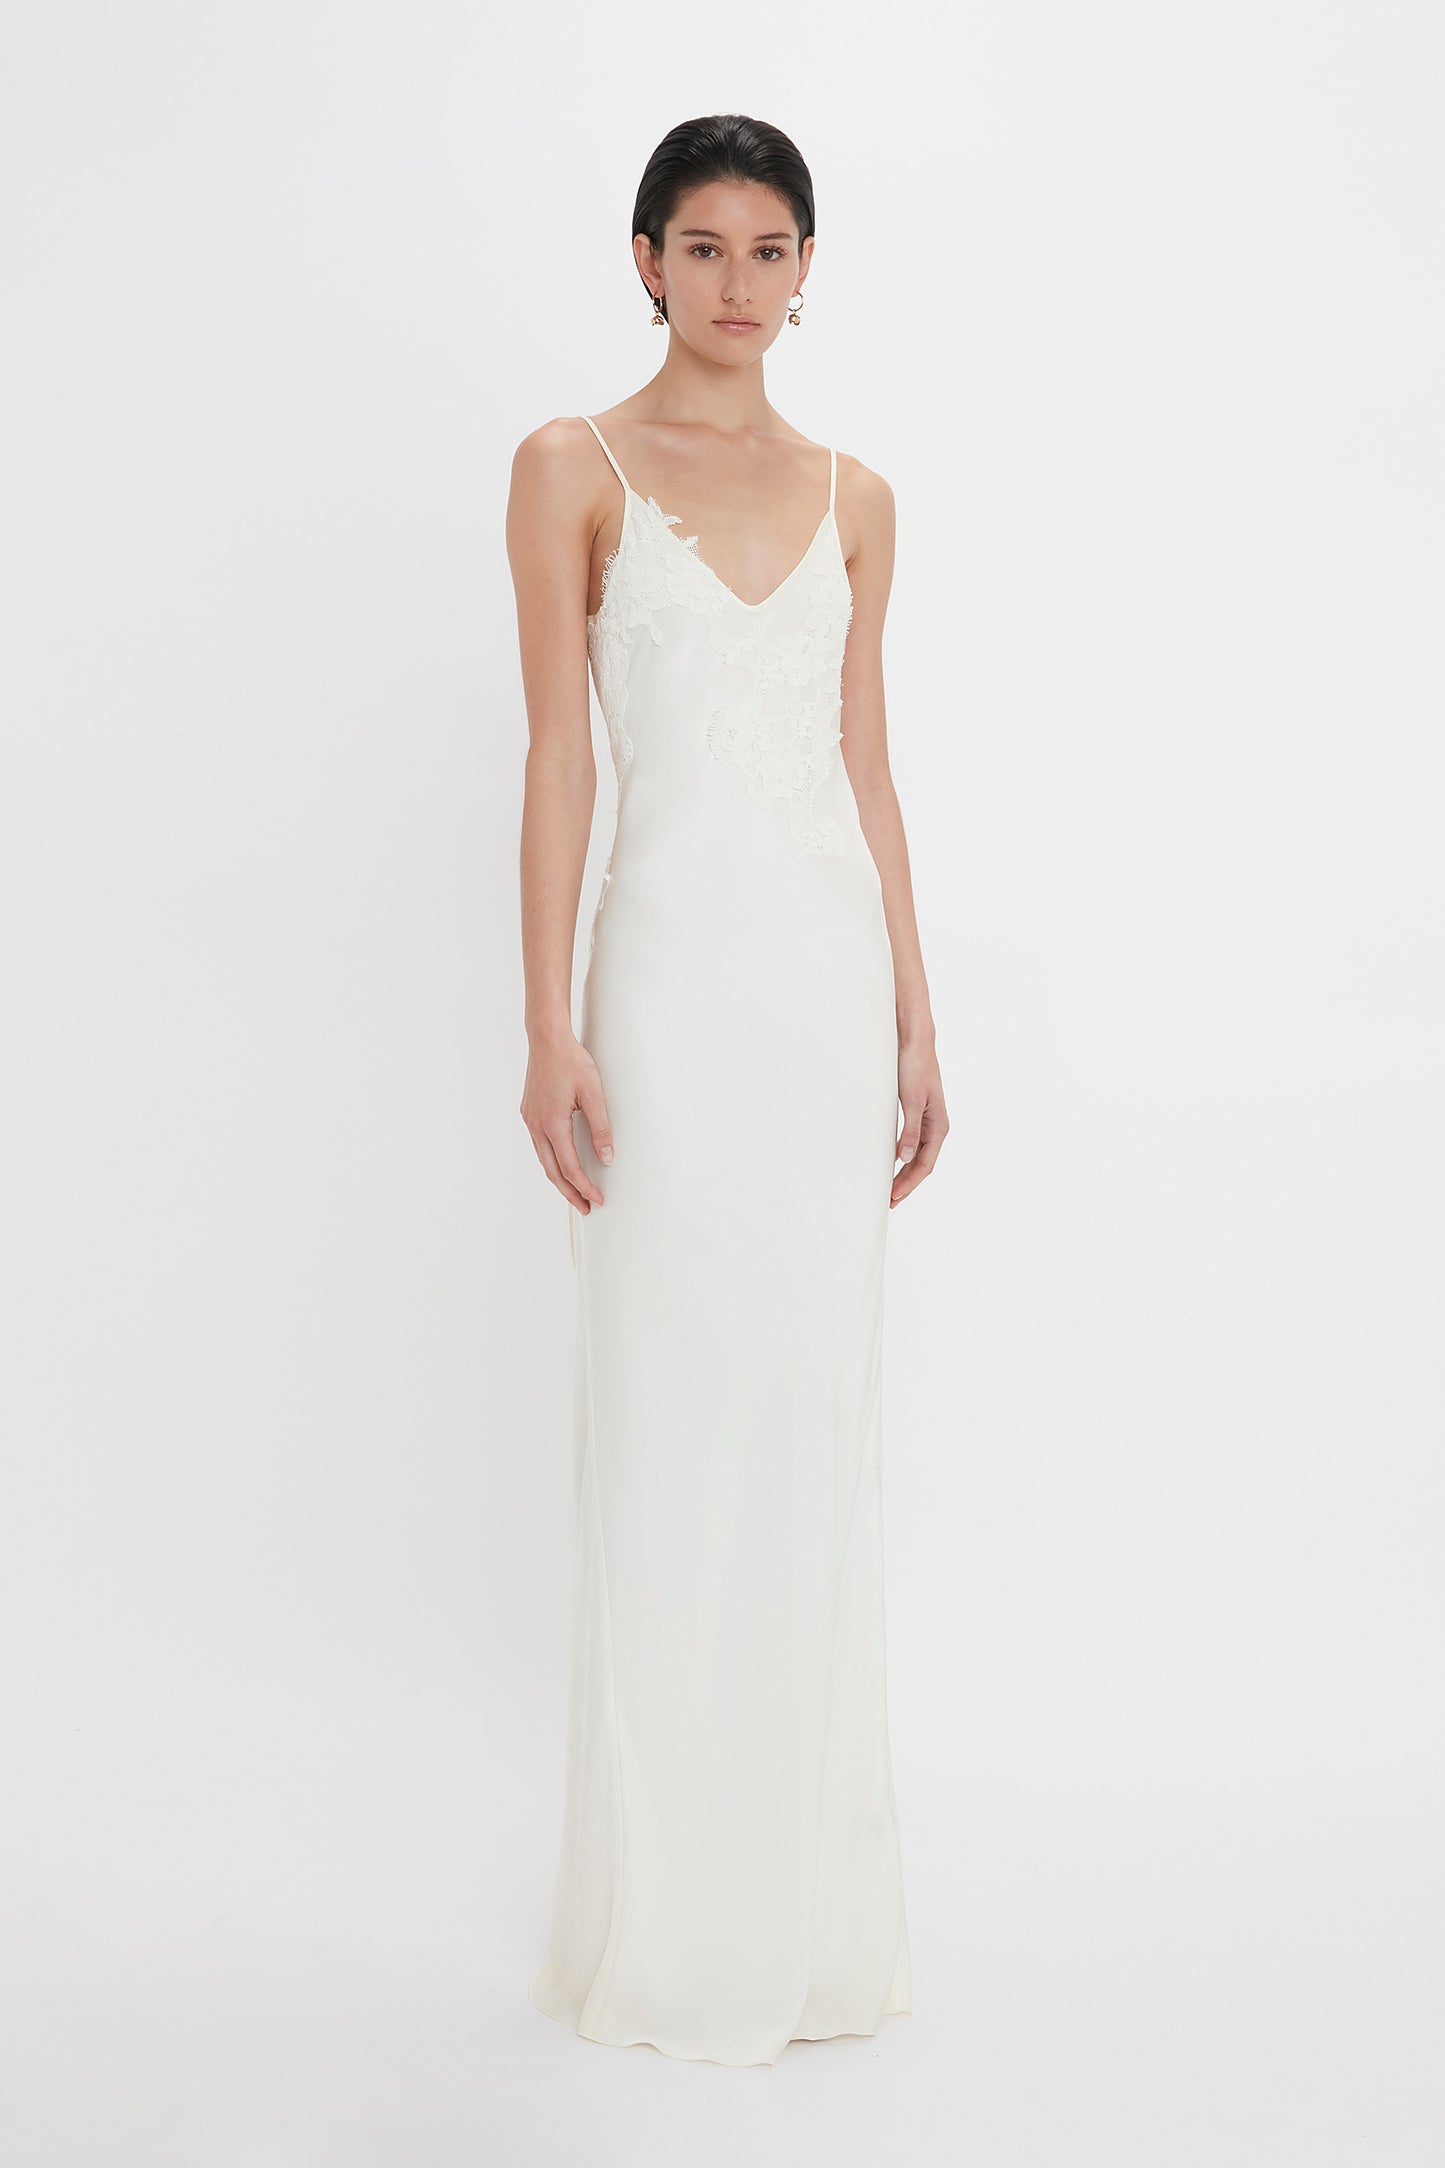 A woman in a sleek, white sleeveless wedding dress with lace detailing at the bodice, standing against a plain white background, wearing Victoria Beckham's Exclusive Camellia Flower Hoop Earrings In Gold.